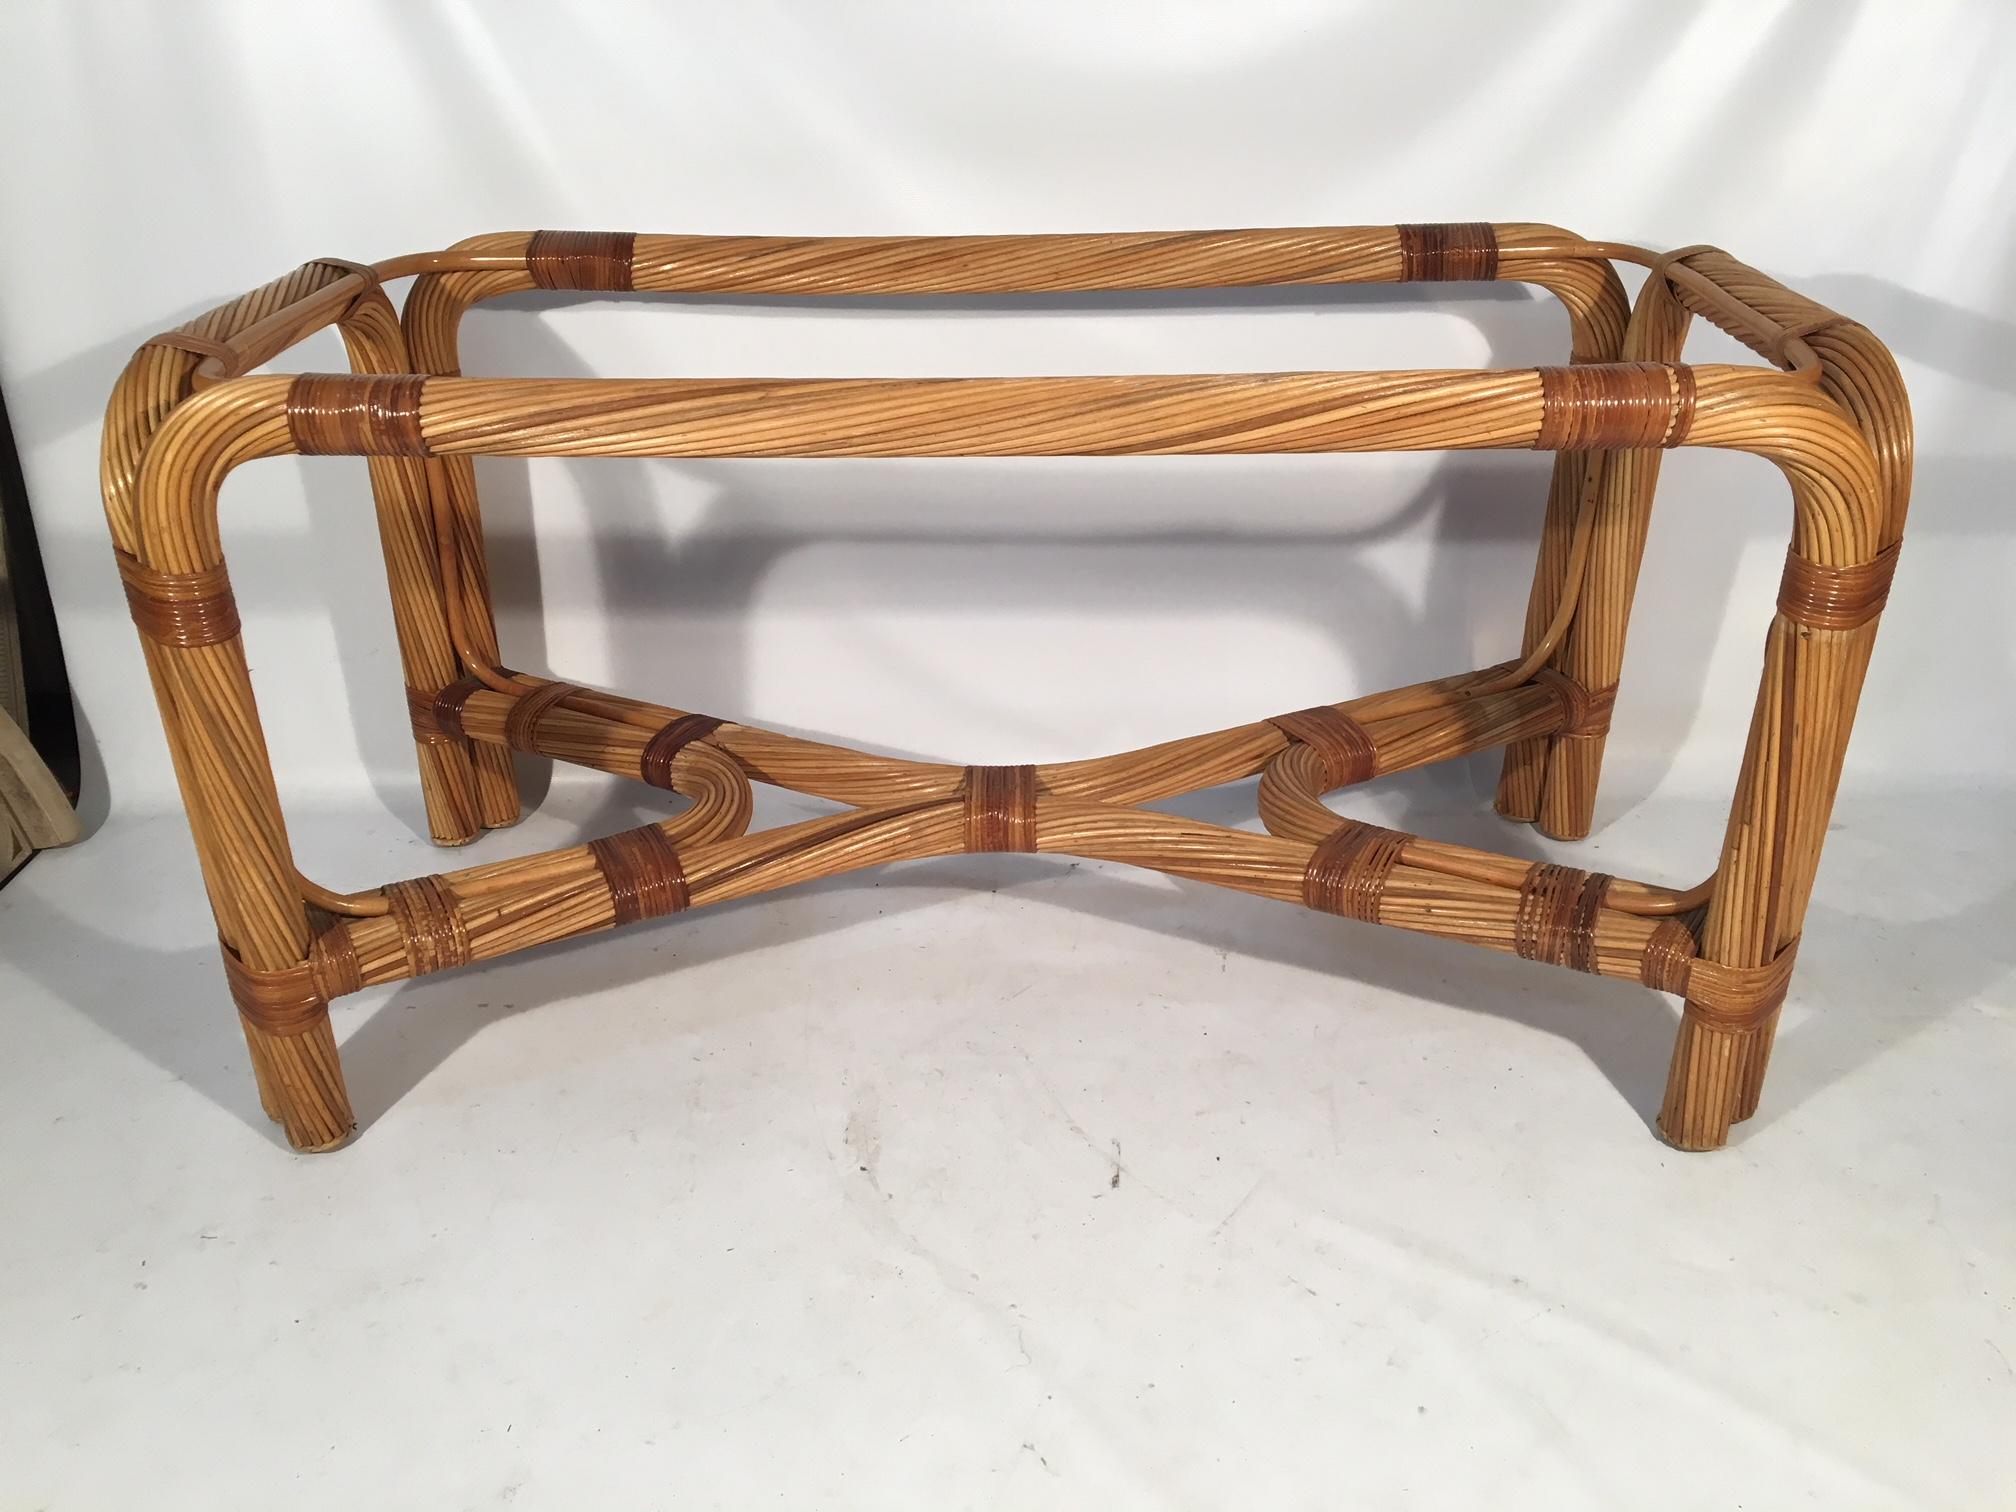 Large twisted rattan table base ready for your glass top. Heavy and structurally sound. Very good condition other than one small section of rattan wrap missing along bottom brace (see photo). Does not detract from table's appearance.